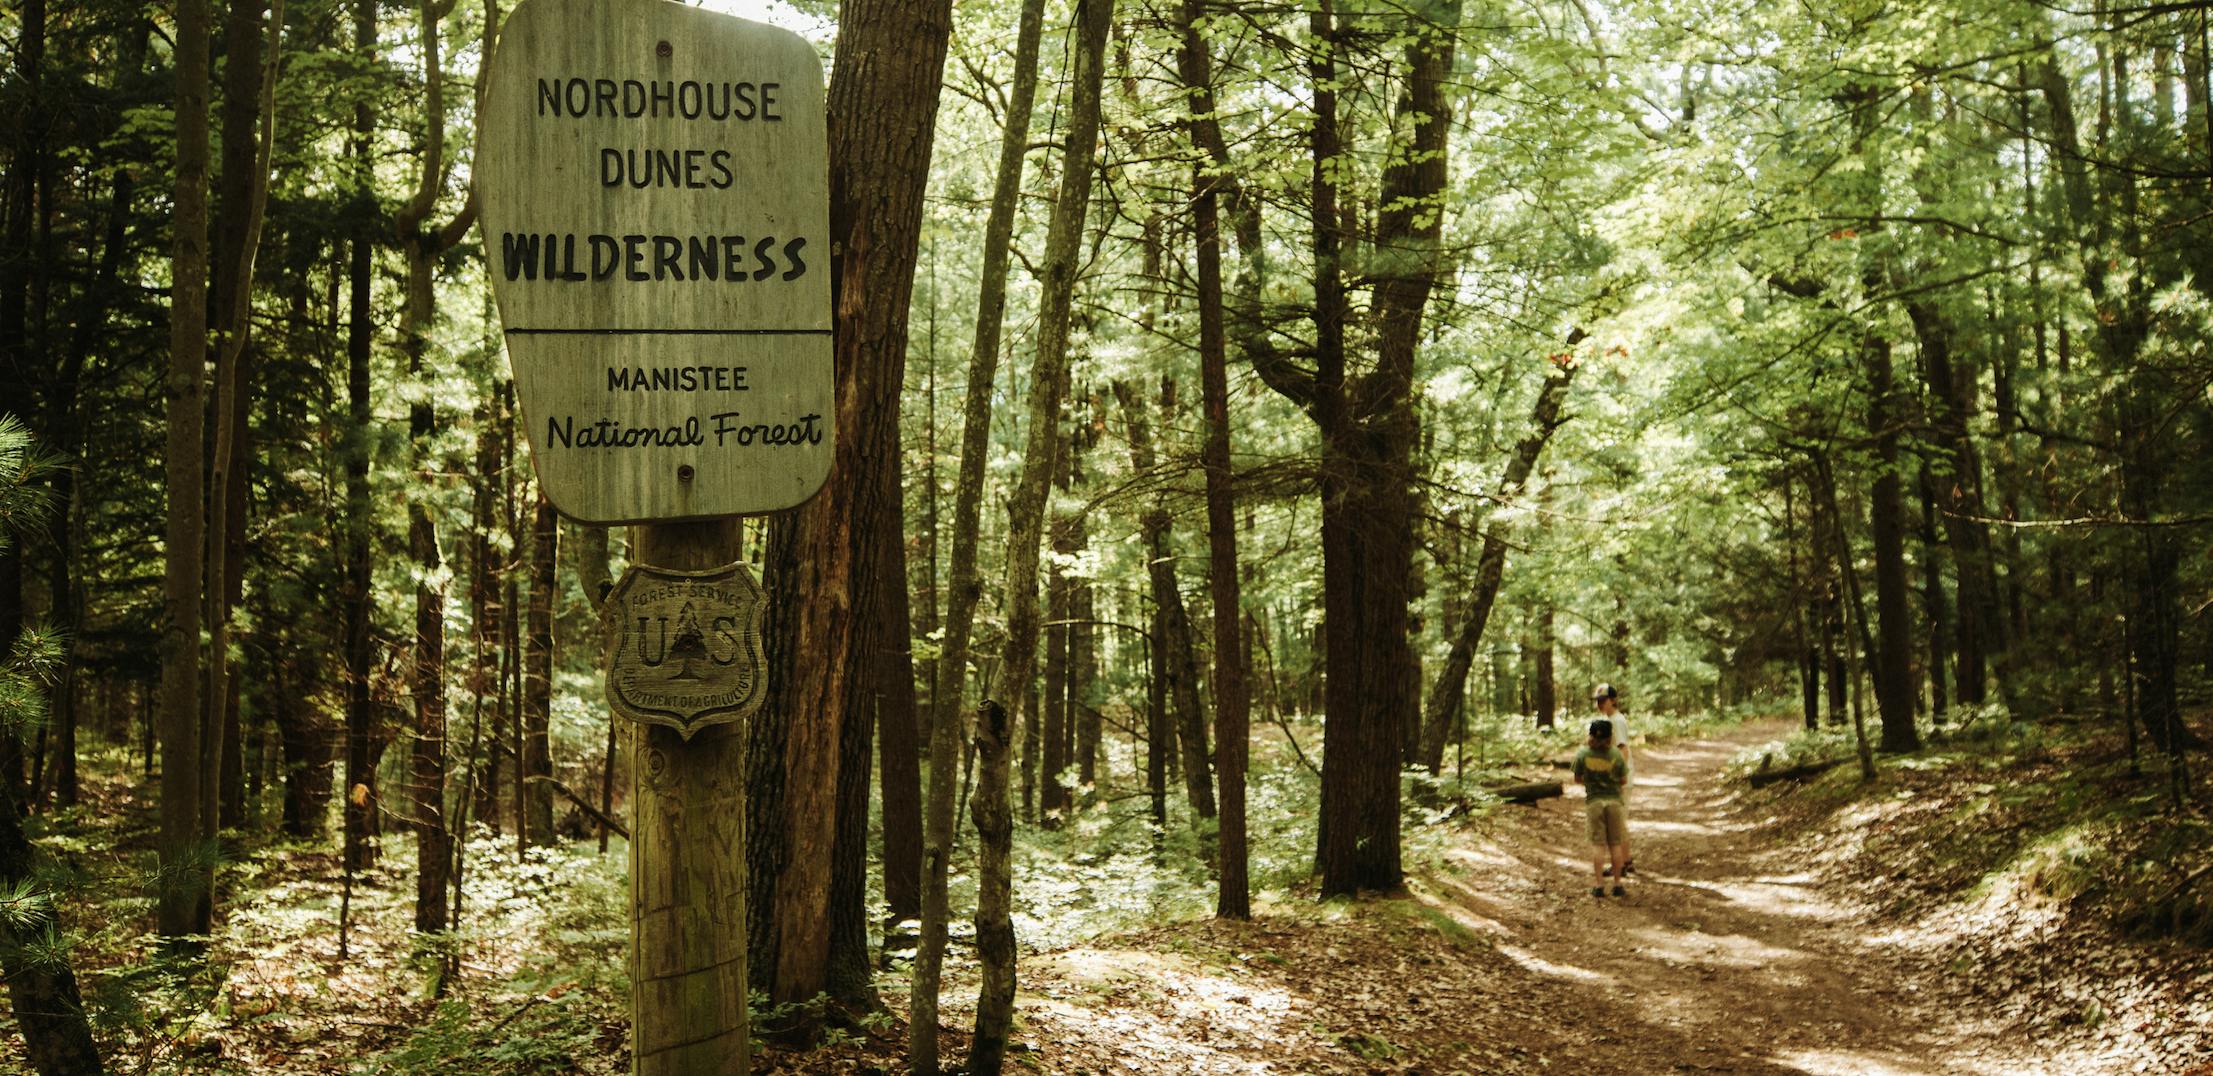 A trail in the Nordhouse Dunes Wilderness area within the Huron-Manistee National Forest, captured by Andy and Kris Murphy